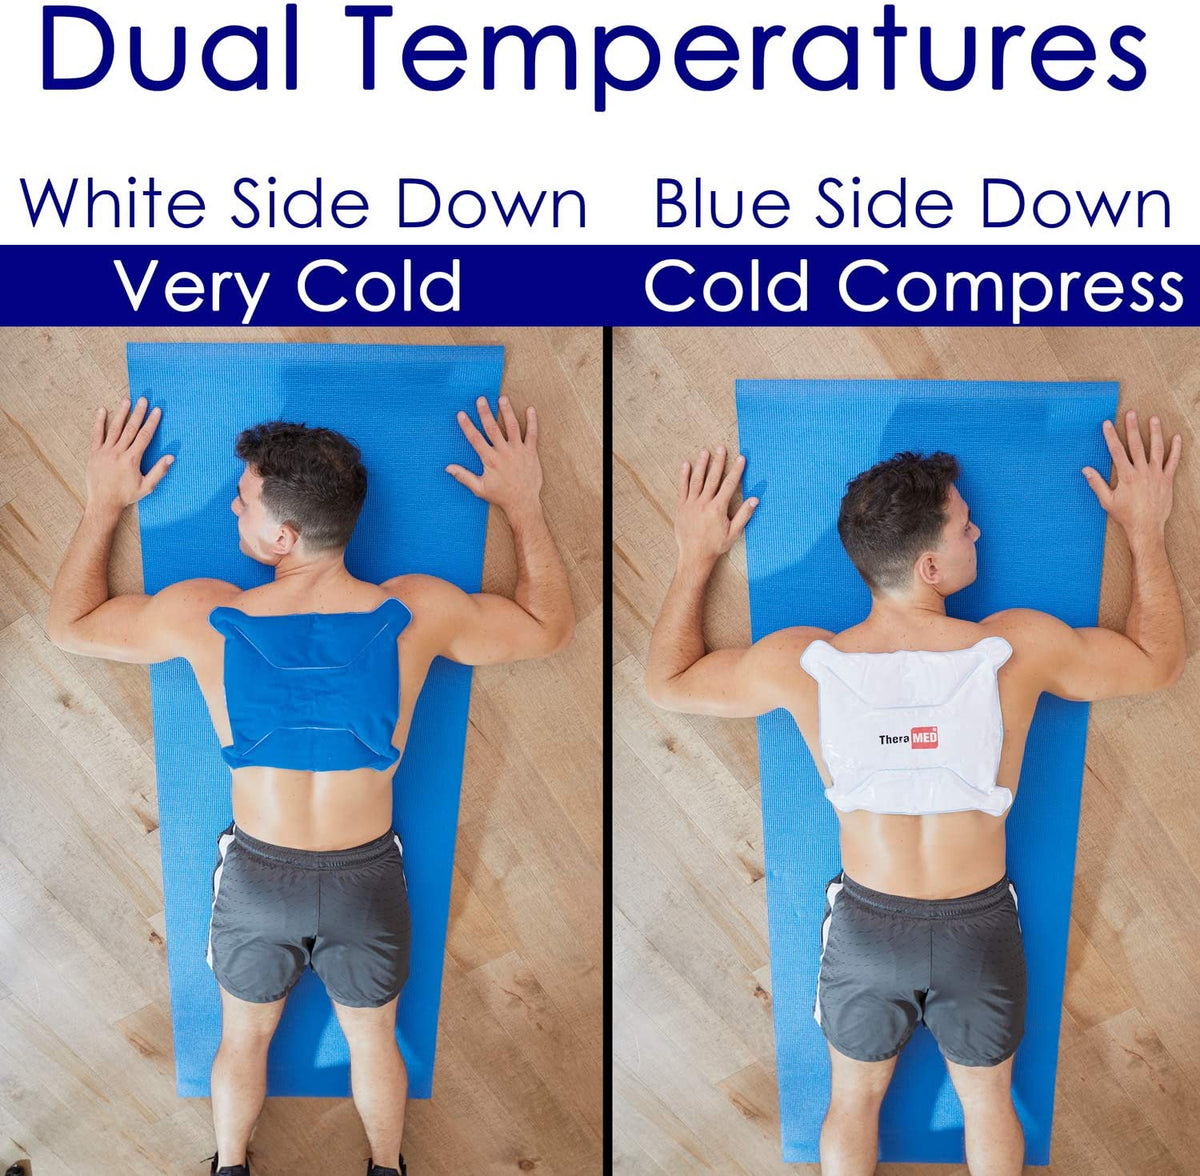 Man using TherMed Reusable Cold Pack. Text: Dual Temperatures: White down for very cold, blue for cold, further details are provided below.